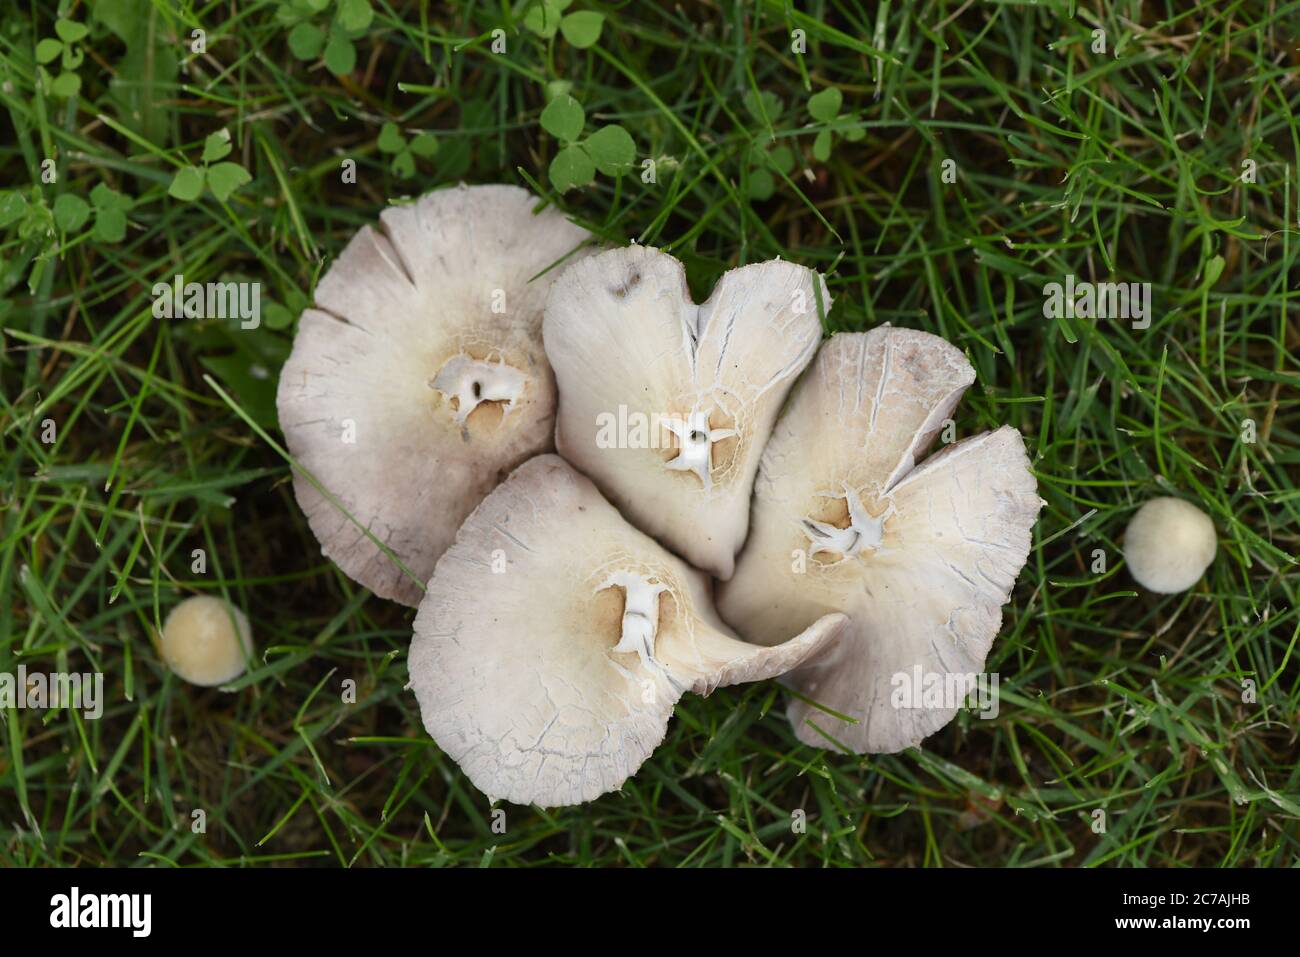 Wild mushrooms in the grass grow  on the lawn of a suburban house. Stock Photo